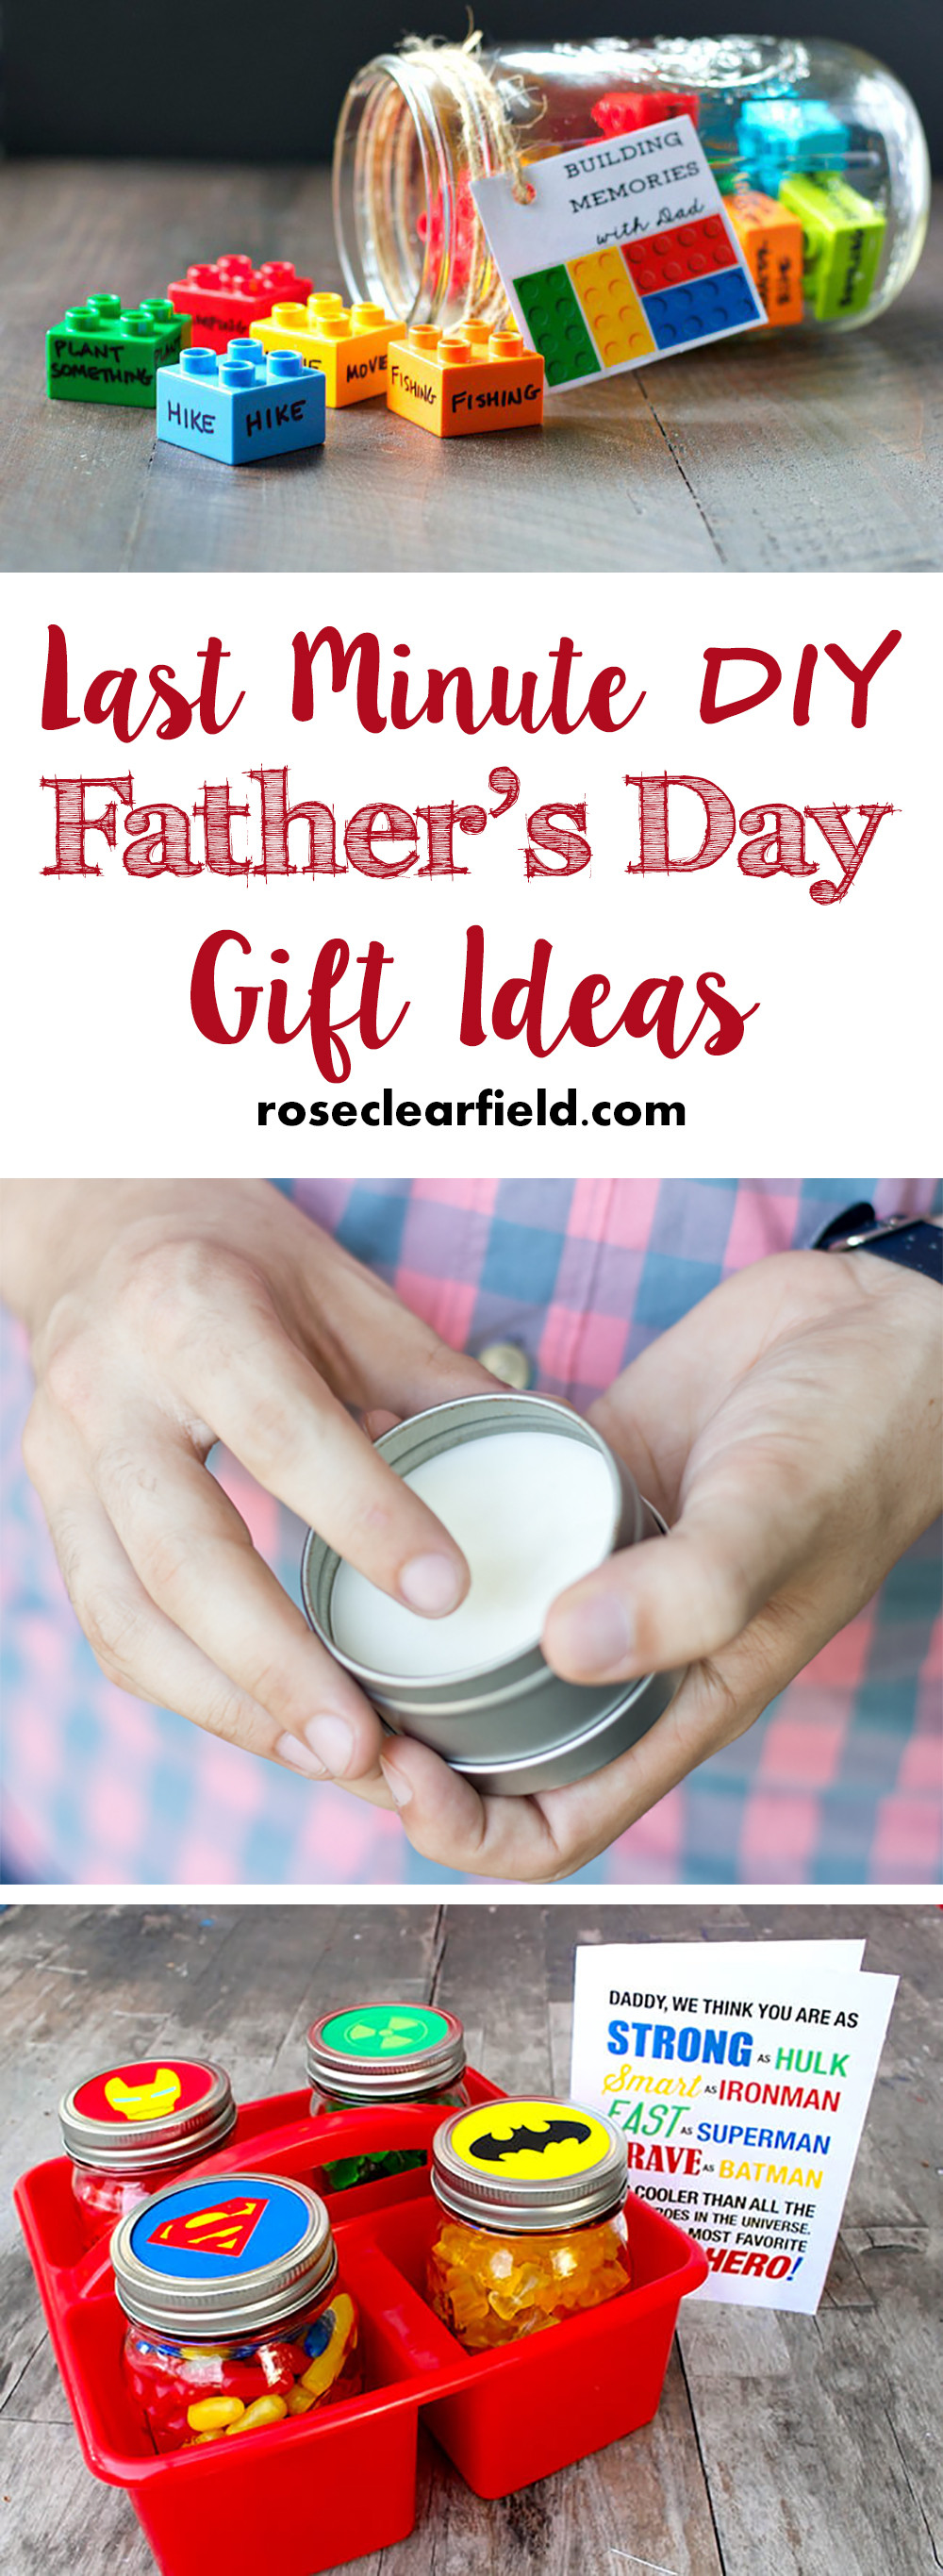 Fathers Day Diy Gift Ideas
 Last Minute DIY Father s Day Gift Ideas • Rose Clearfield